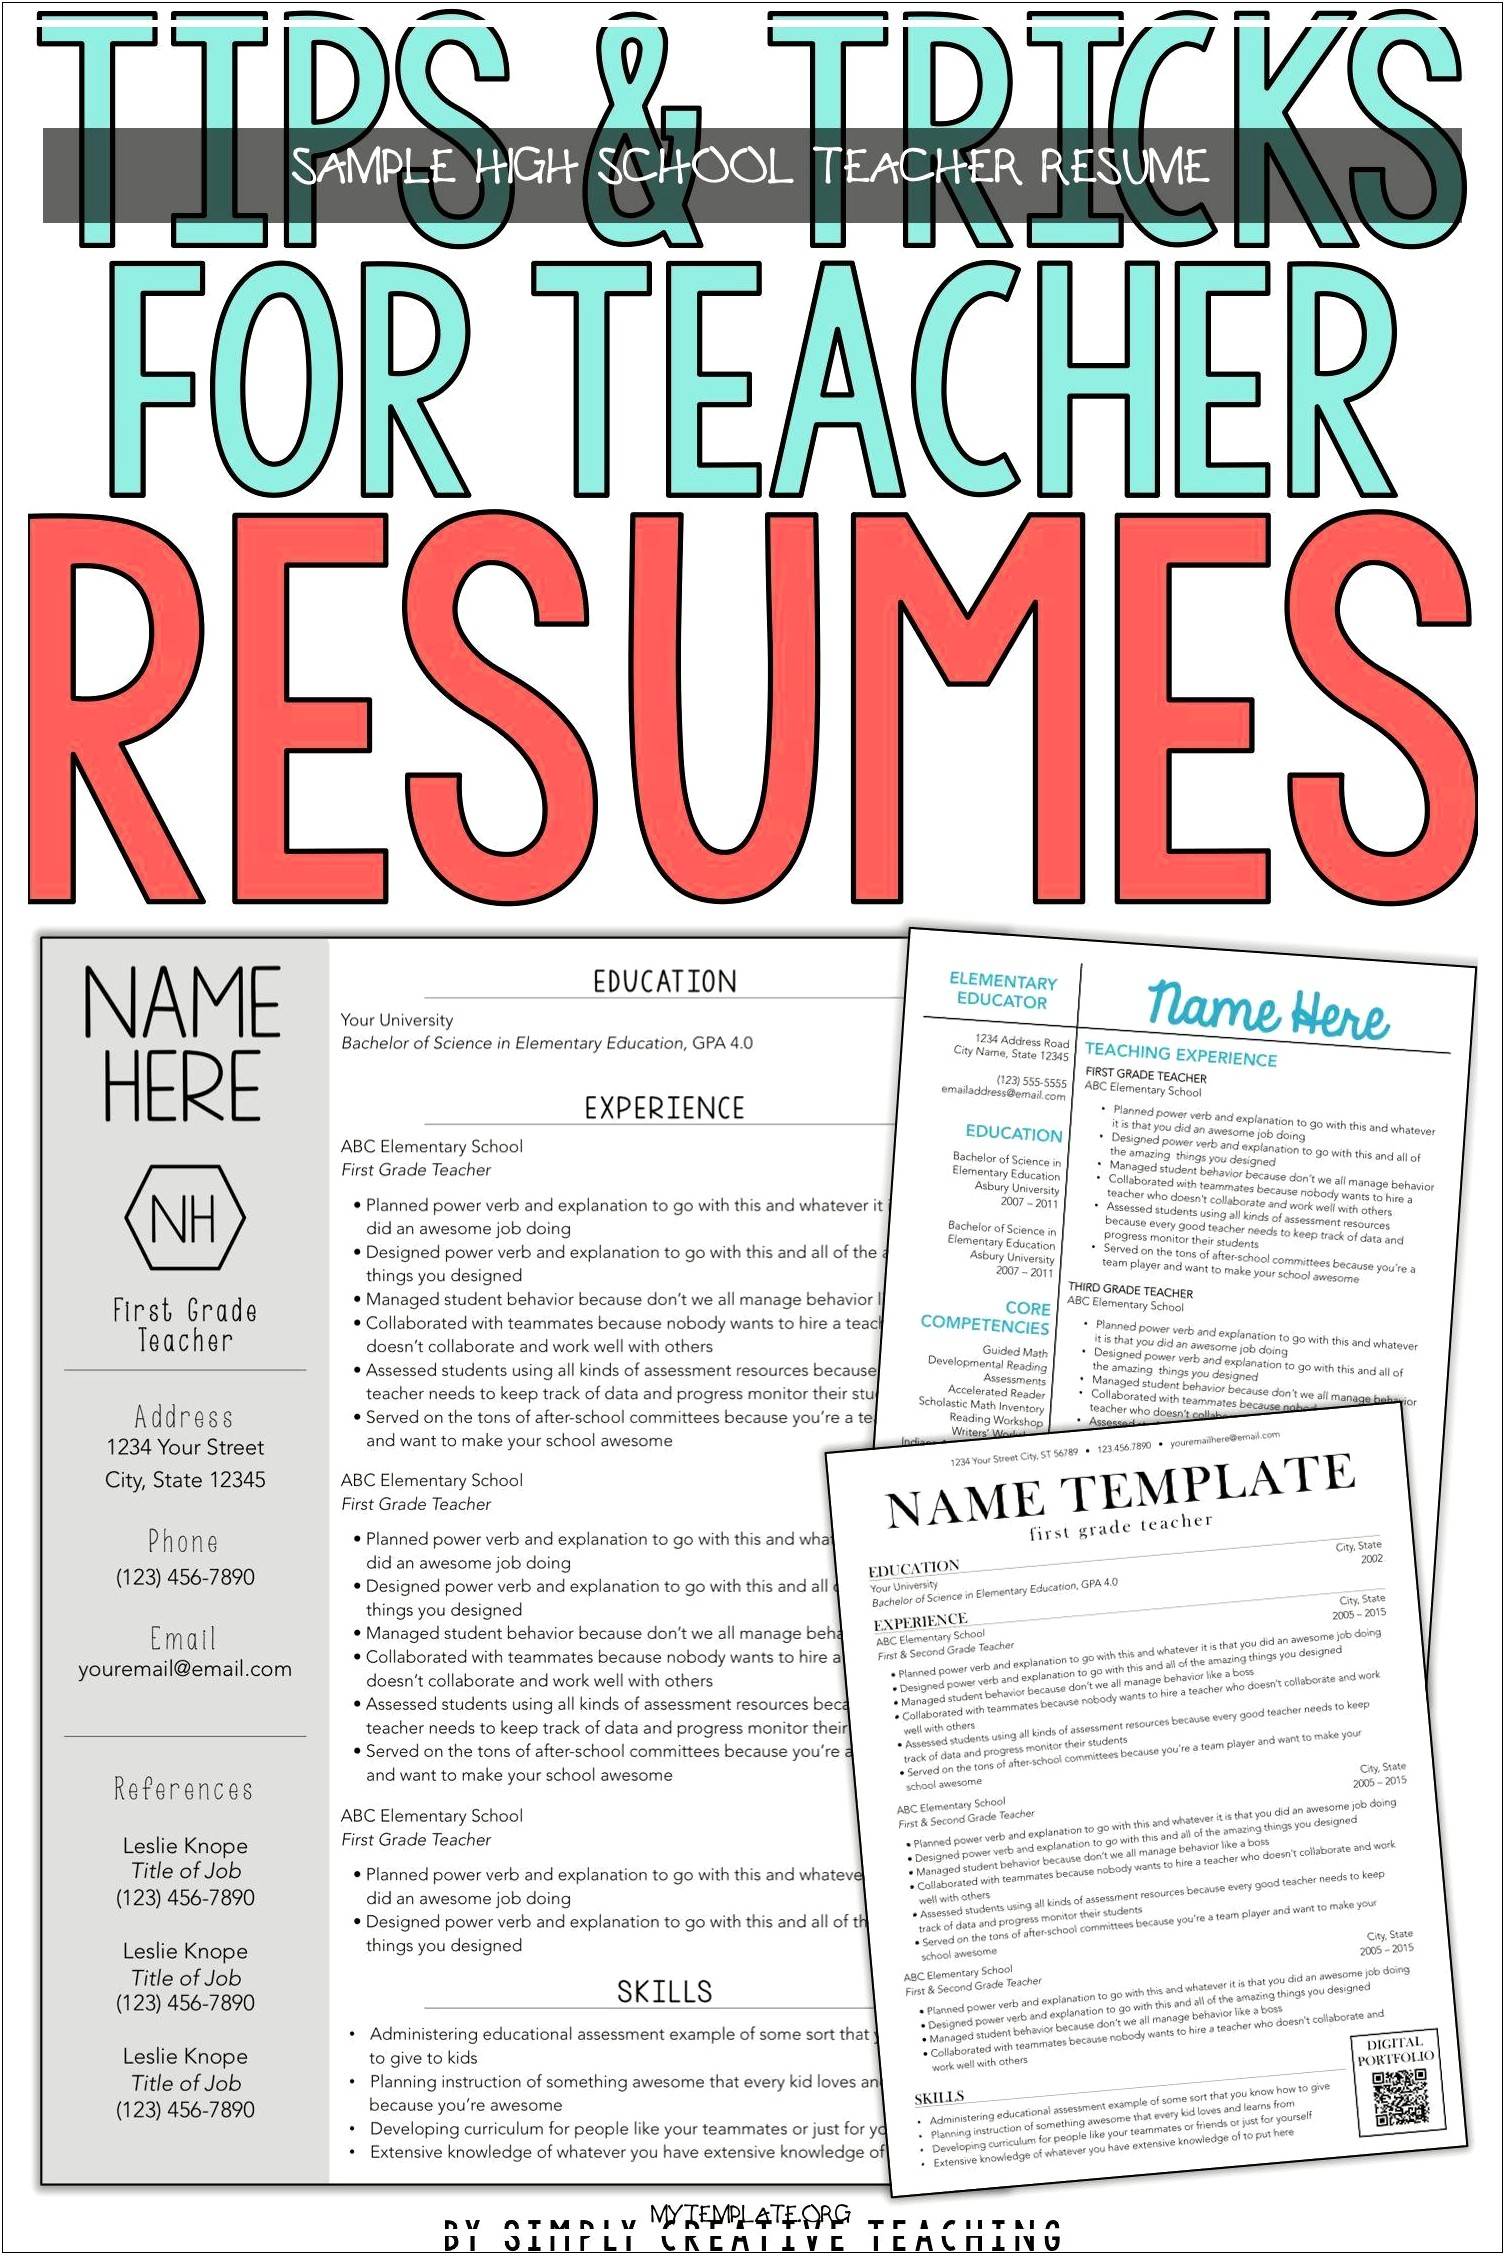 Does Education Or Experience Go First On Resume